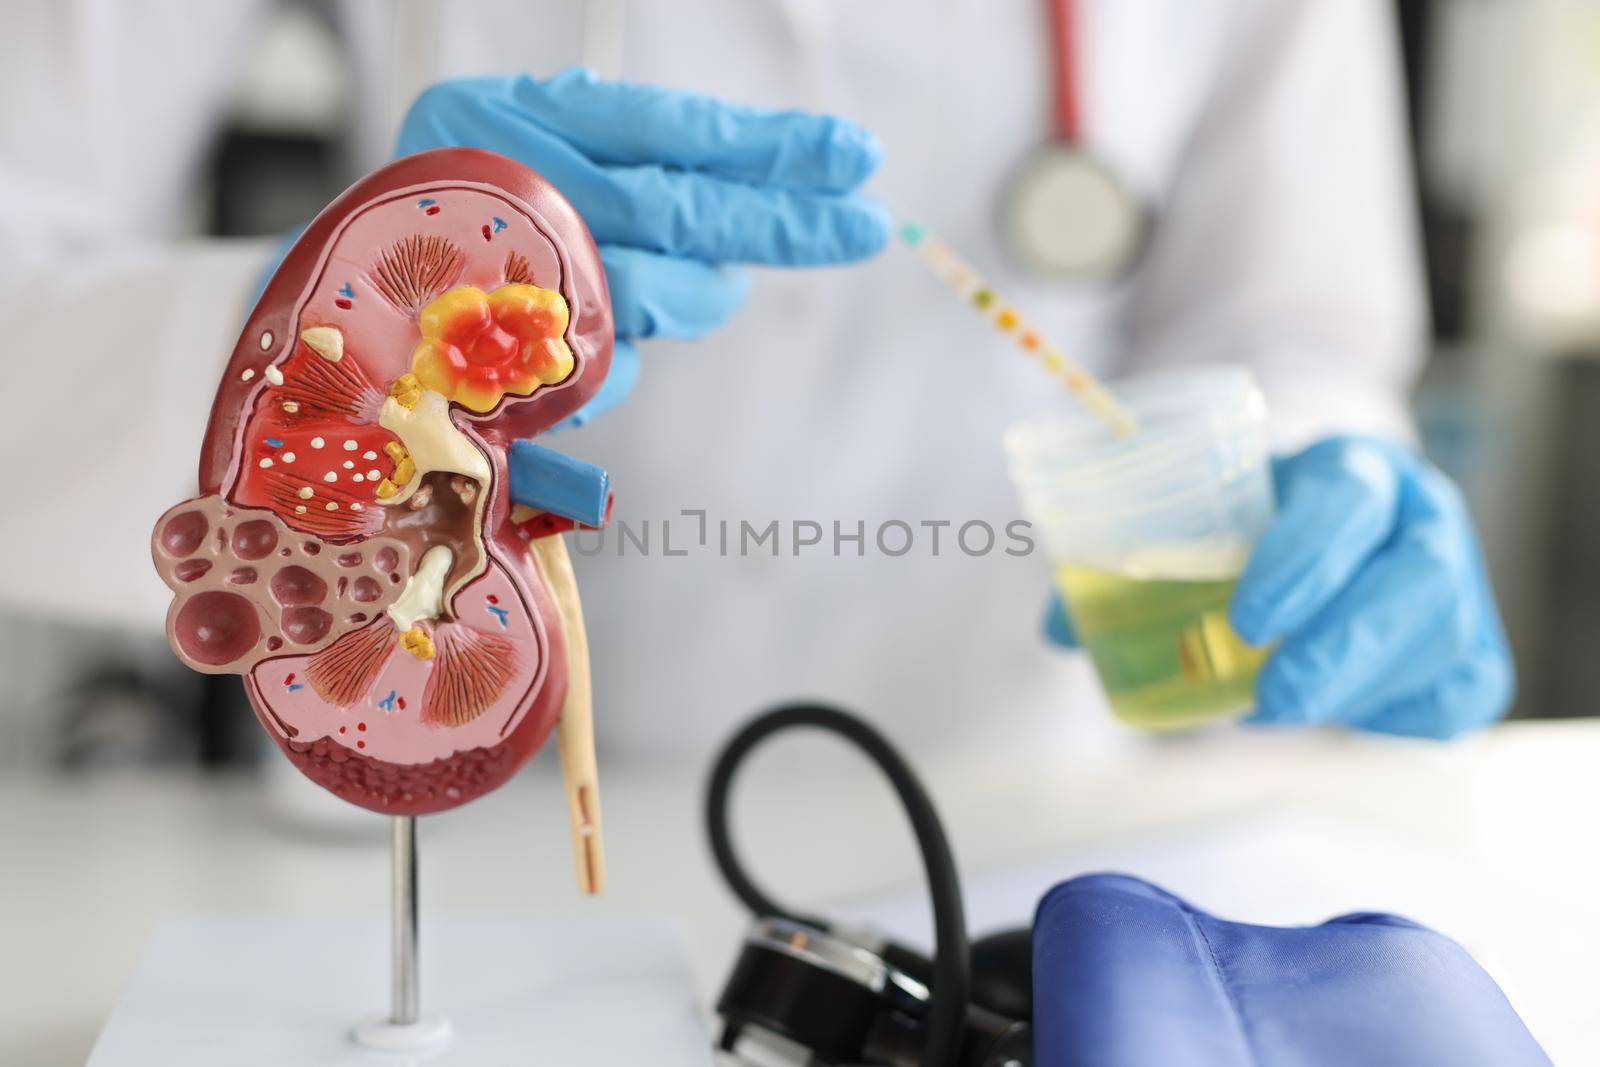 Artificial model of kidney and ureter of human standing on table of urologist doctor with urine test closeup. Diagnosis and treatment of diseases of urinary system concept